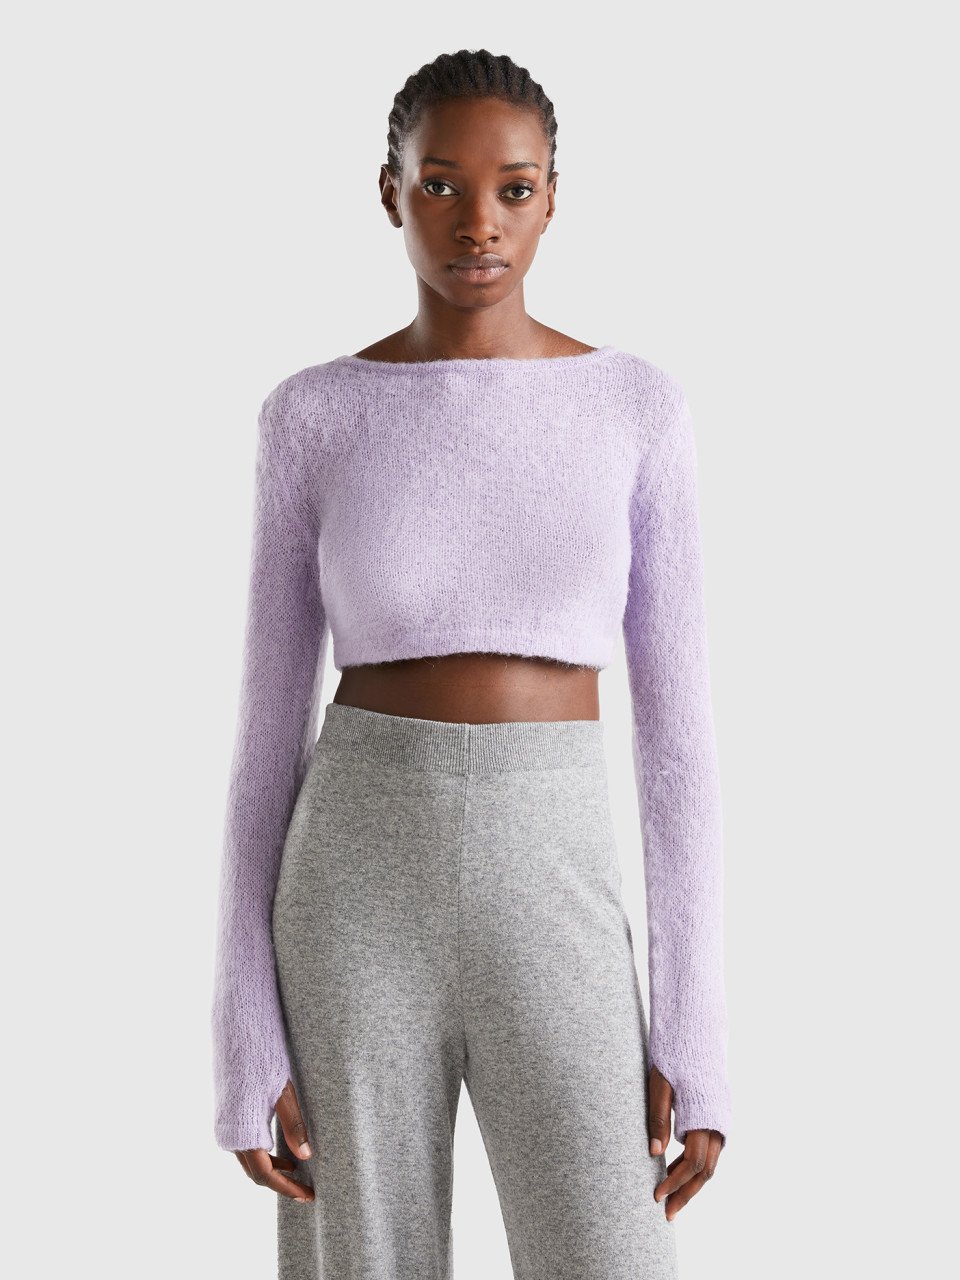 Benetton, Cropped Sweater In Mohair Blend, Lilac, Women